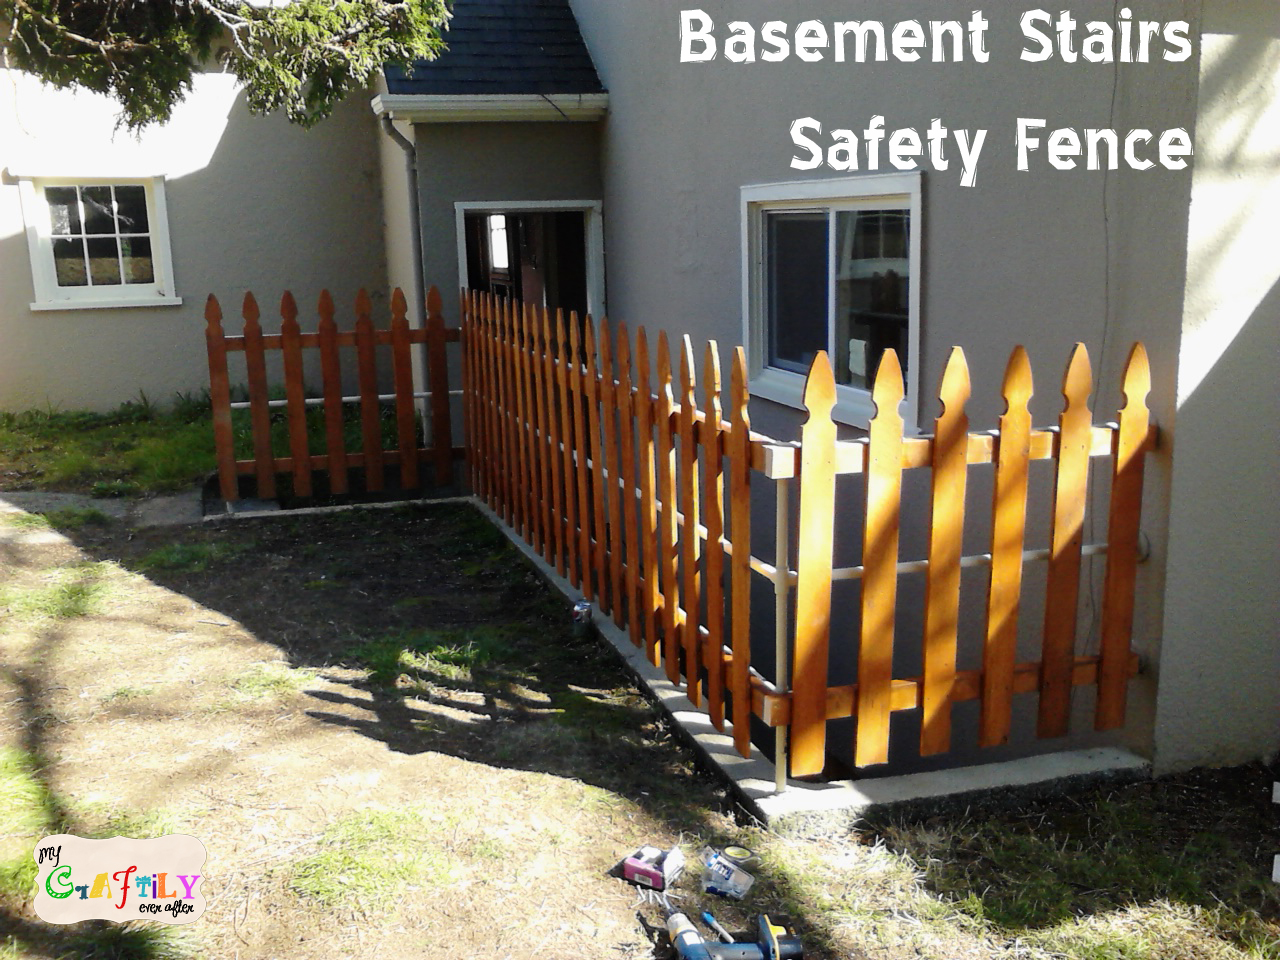 Creating basement stairs safety fence